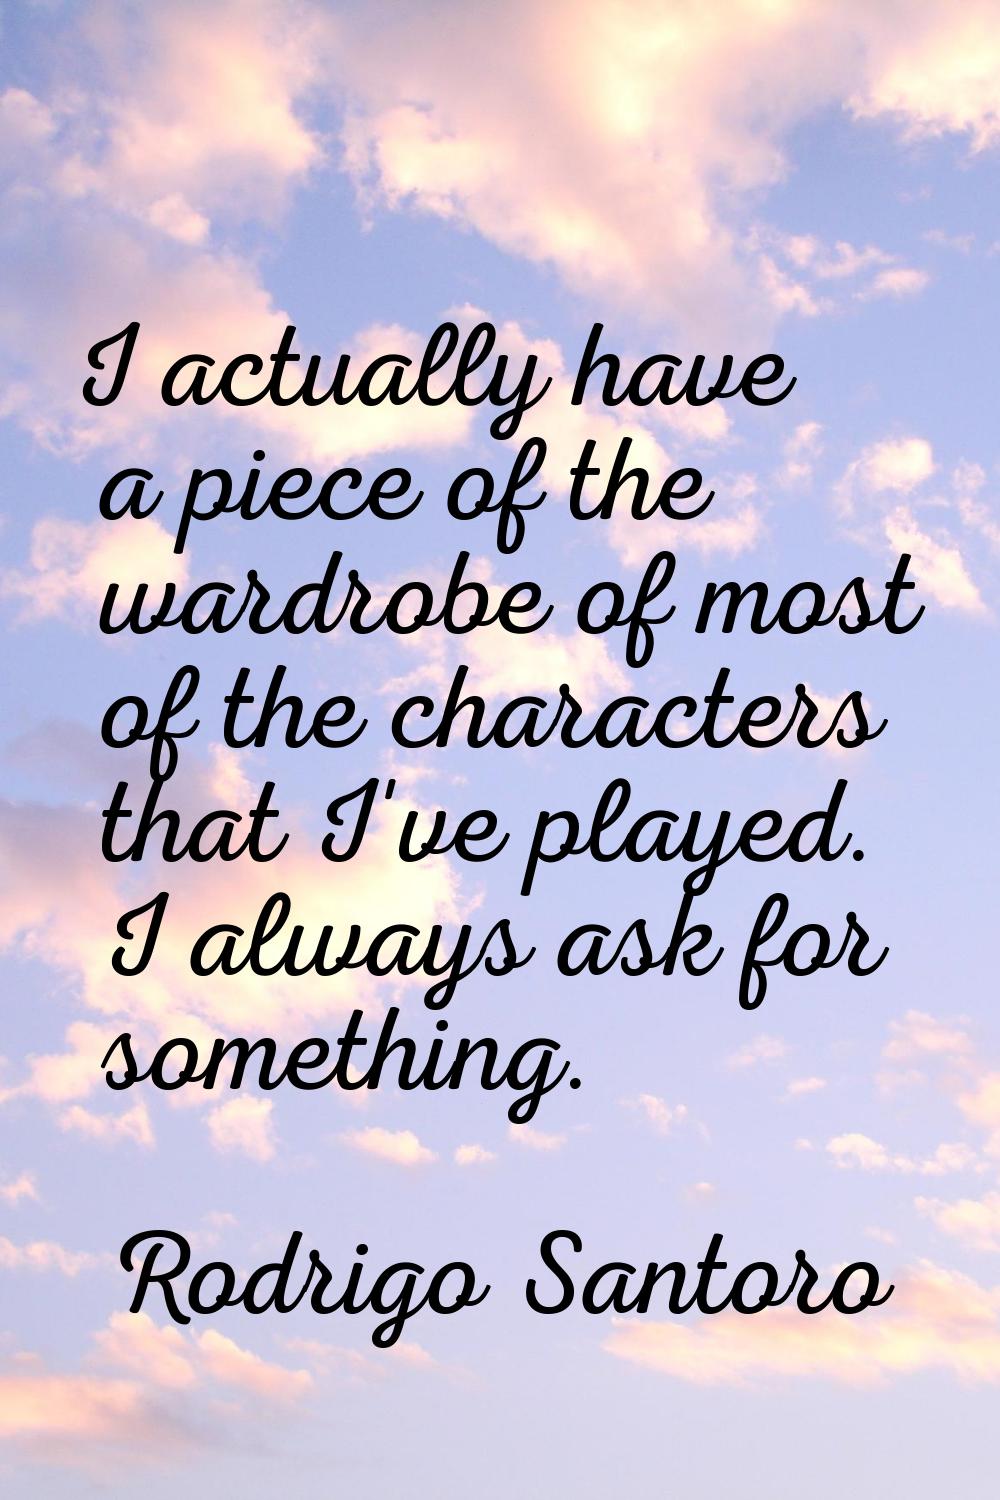 I actually have a piece of the wardrobe of most of the characters that I've played. I always ask fo